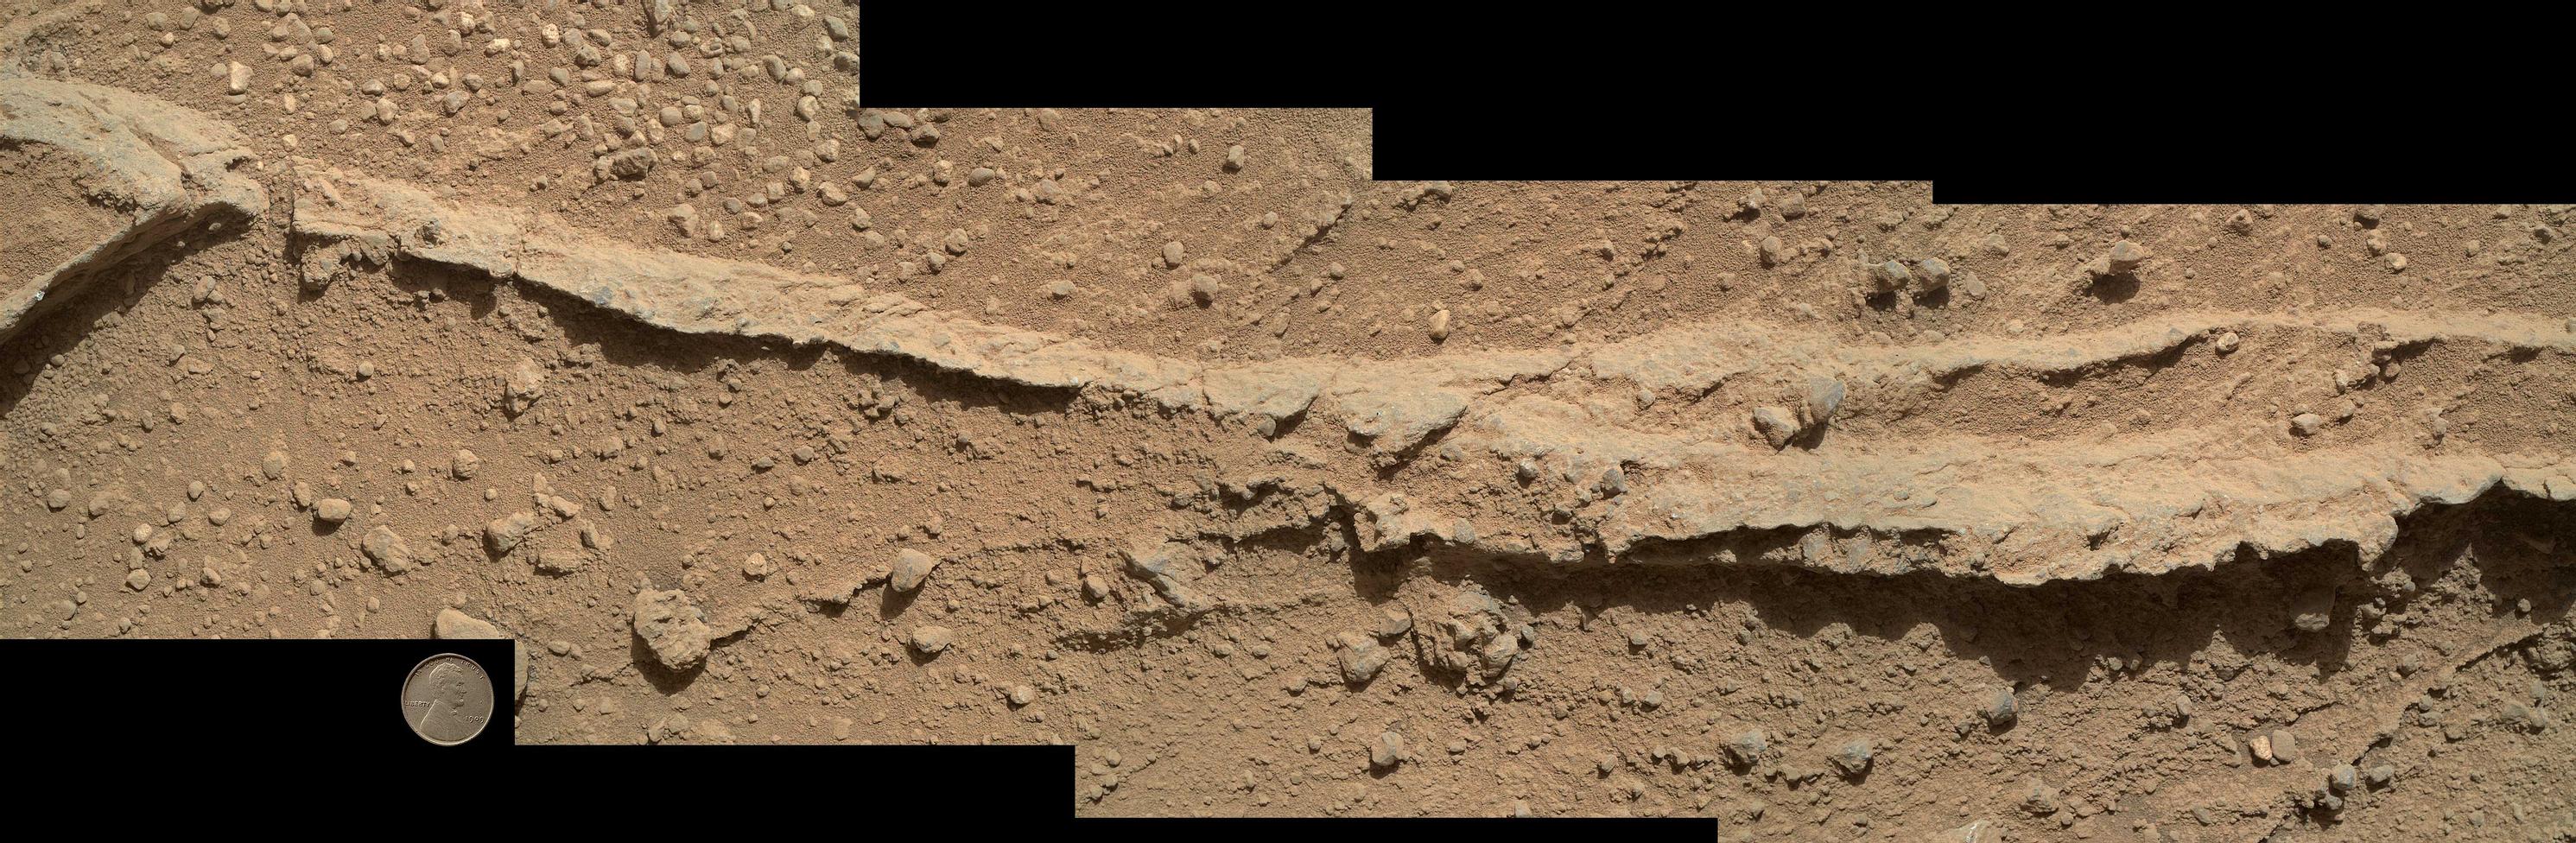 Close-up of Ridge in Rock Outcrop at Curiosity's Waypoint 1